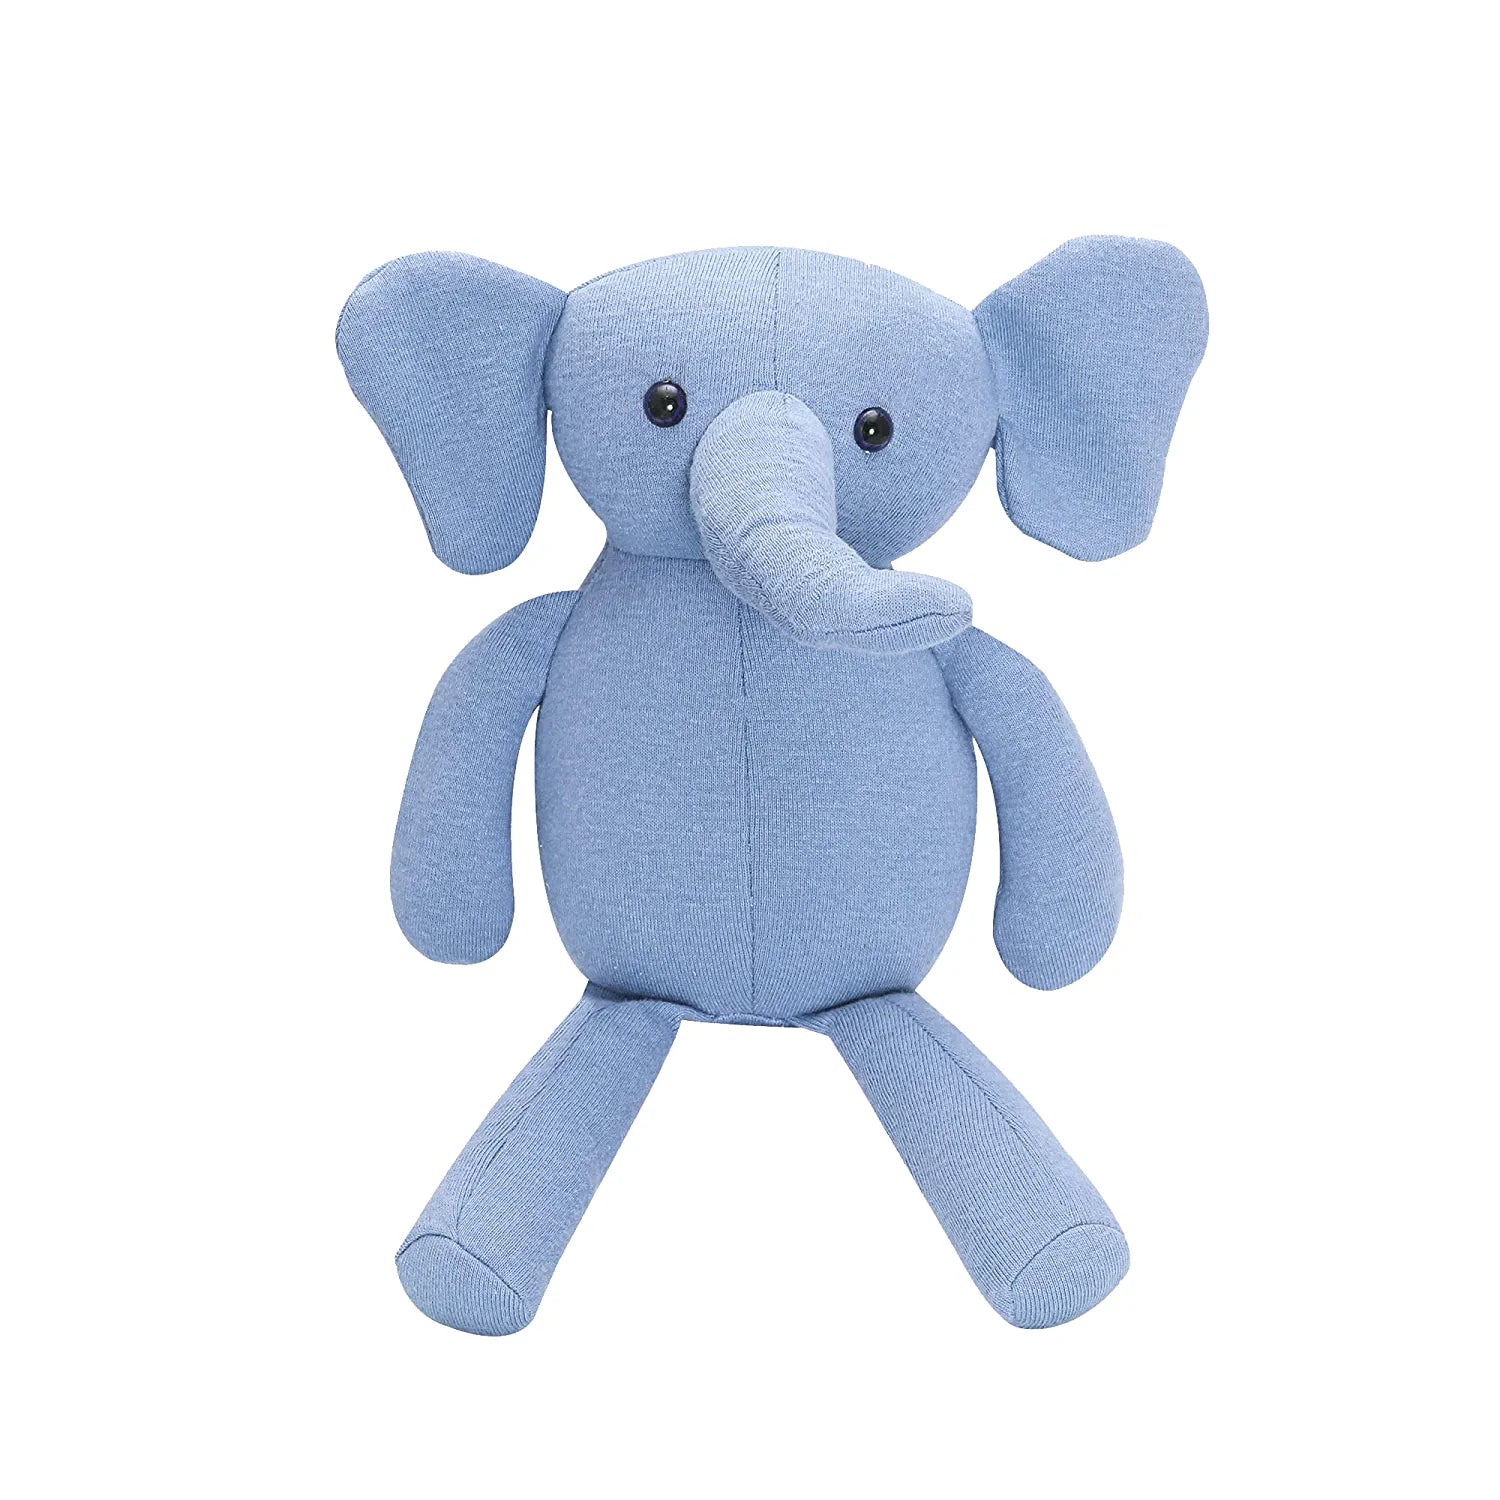 Cute Small Elephant Soft Toys for Kids Loveable Huggable Playing Toys for Girls & Boys